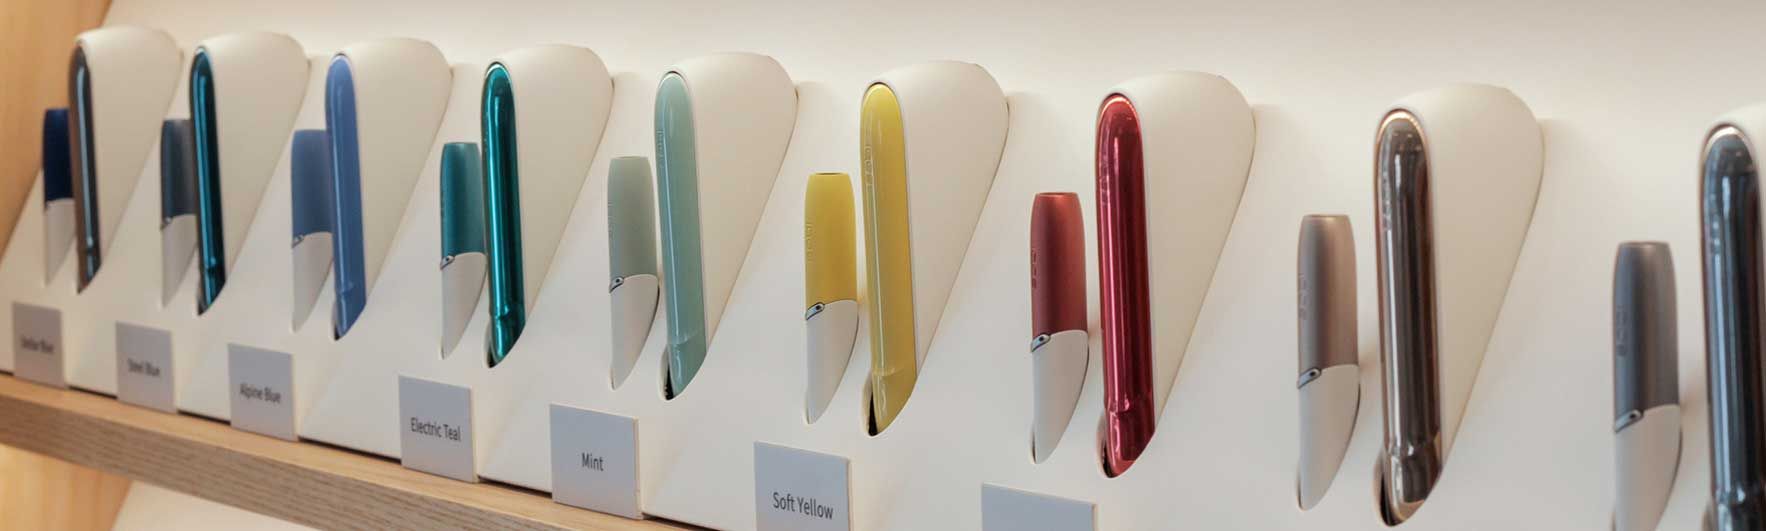 IQOS 3 kit with coloured caps and door covers at an IQOS shop